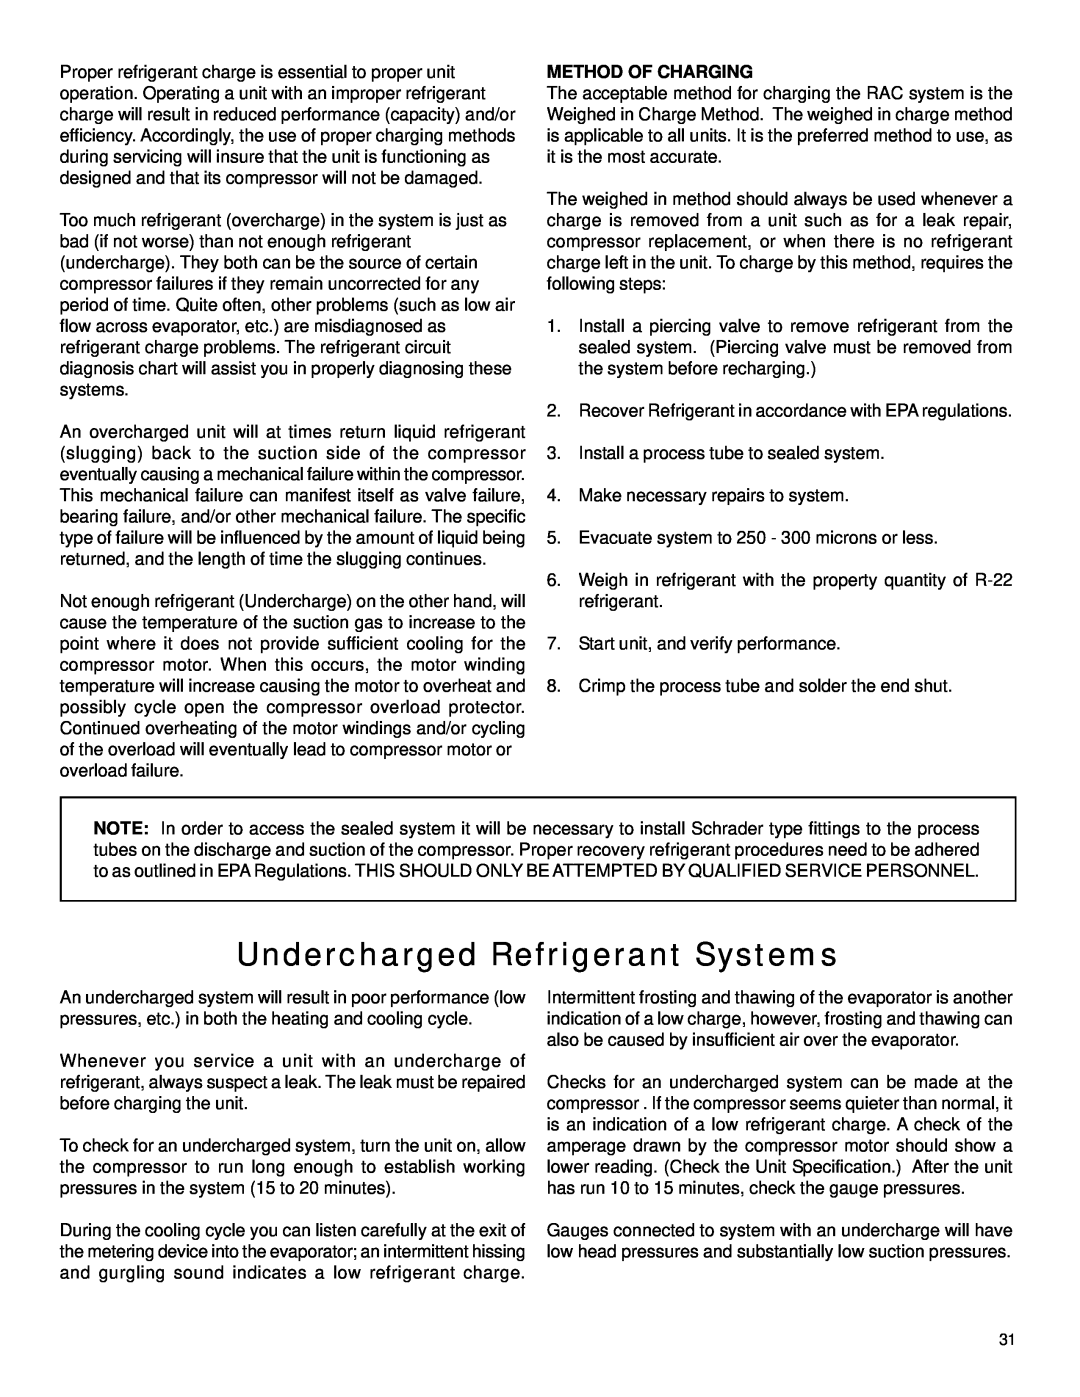 Friedrich racservmn service manual Undercharged Refrigerant Systems, Method Of Charging 